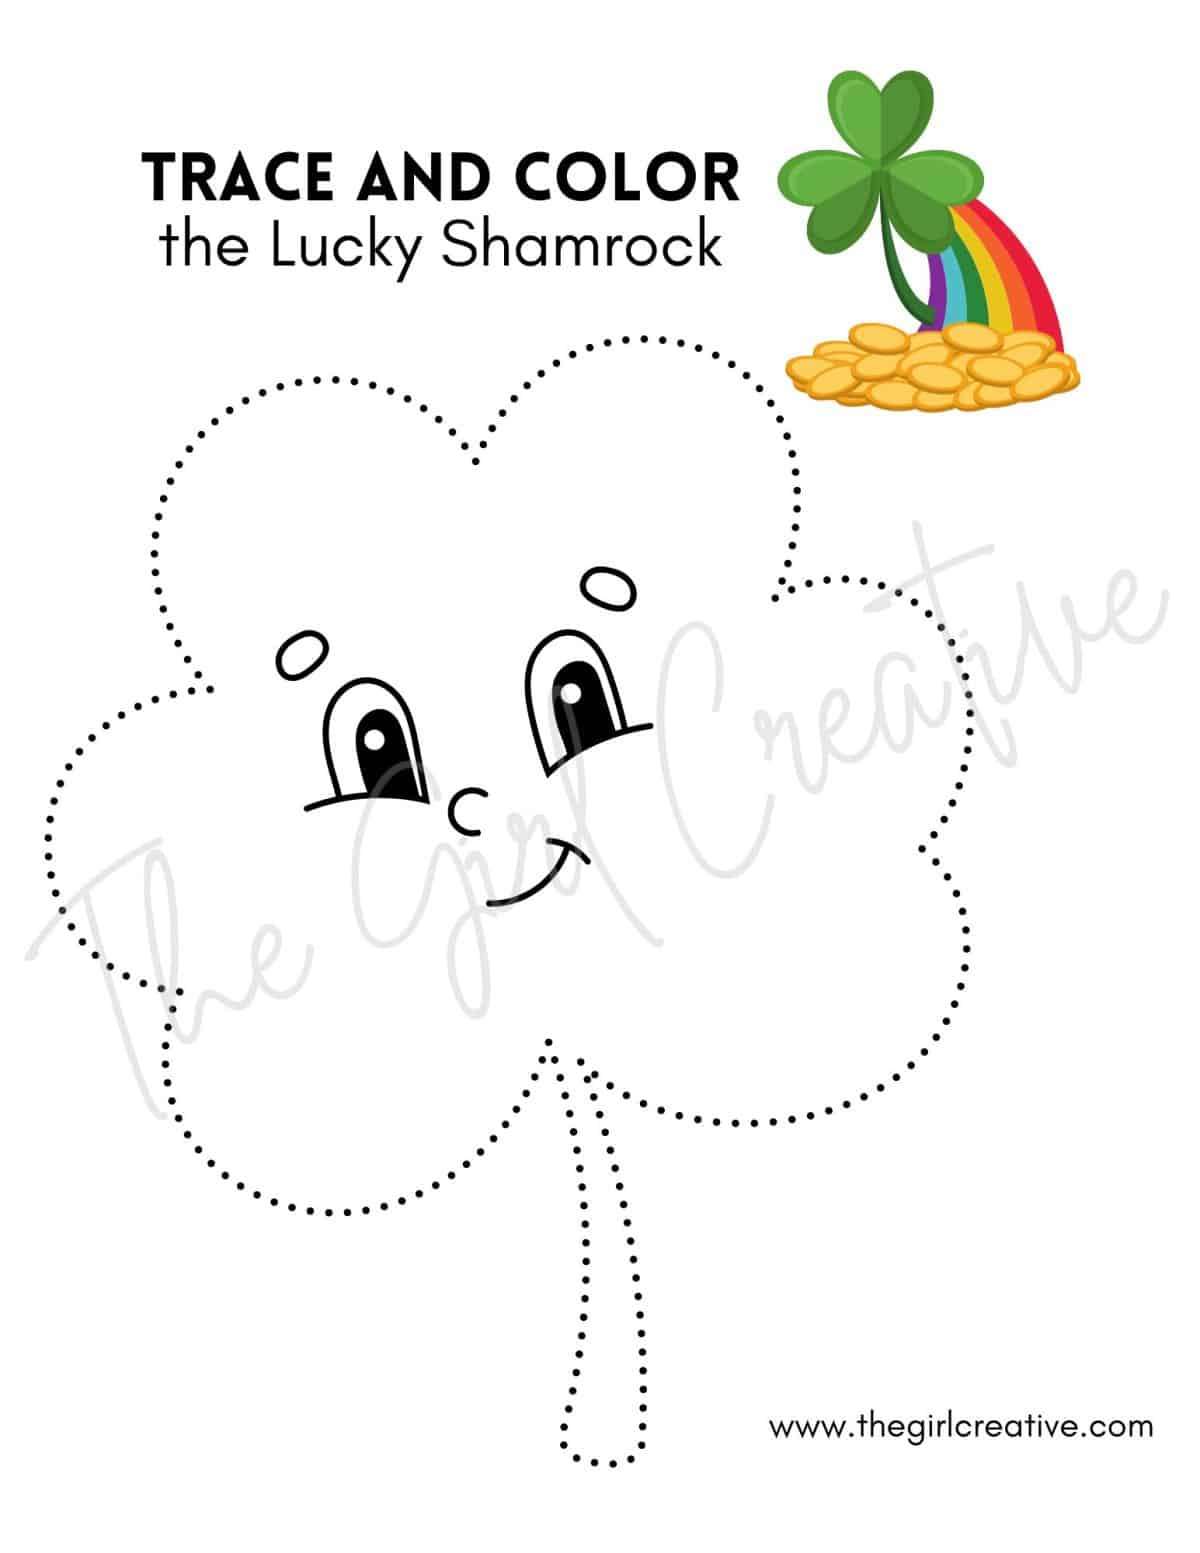 Shamrock coloring page for St. Patrick's Day